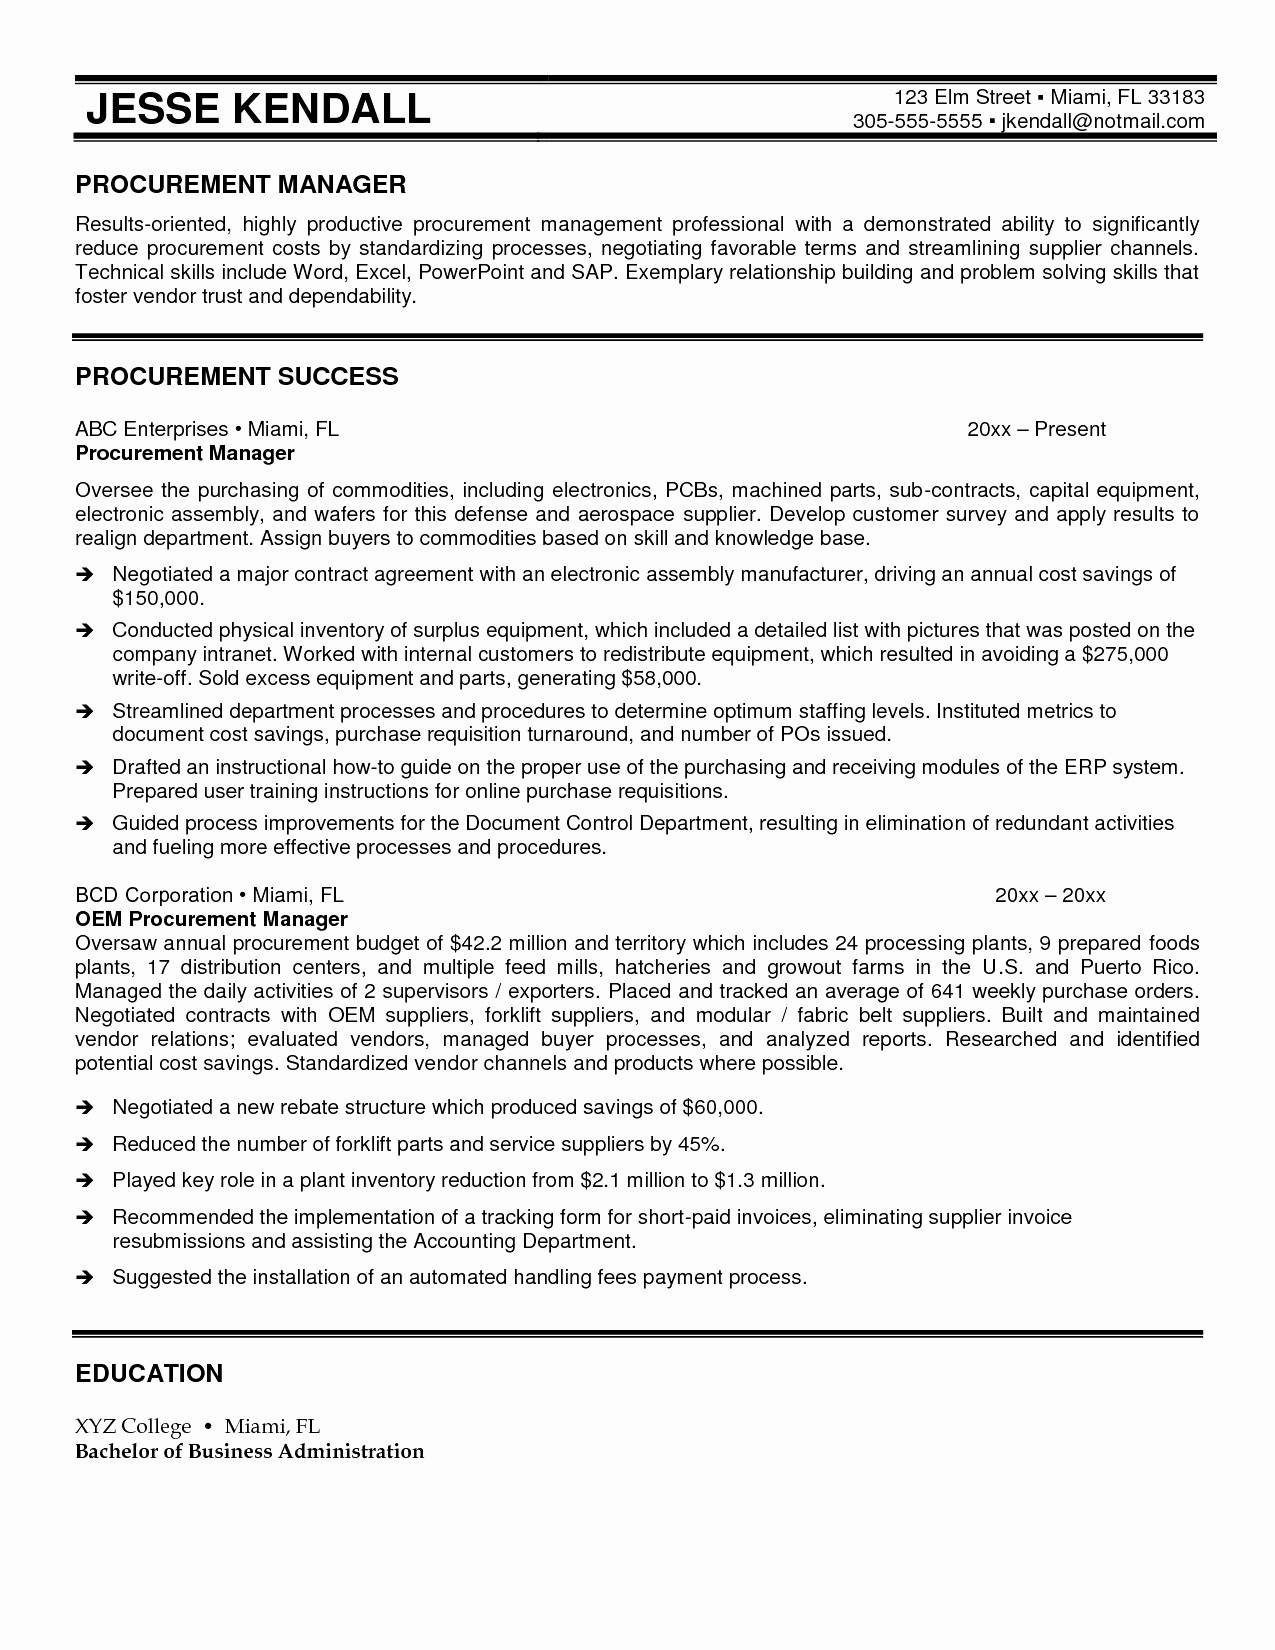 Information Technology Contract Template Inspirational Document